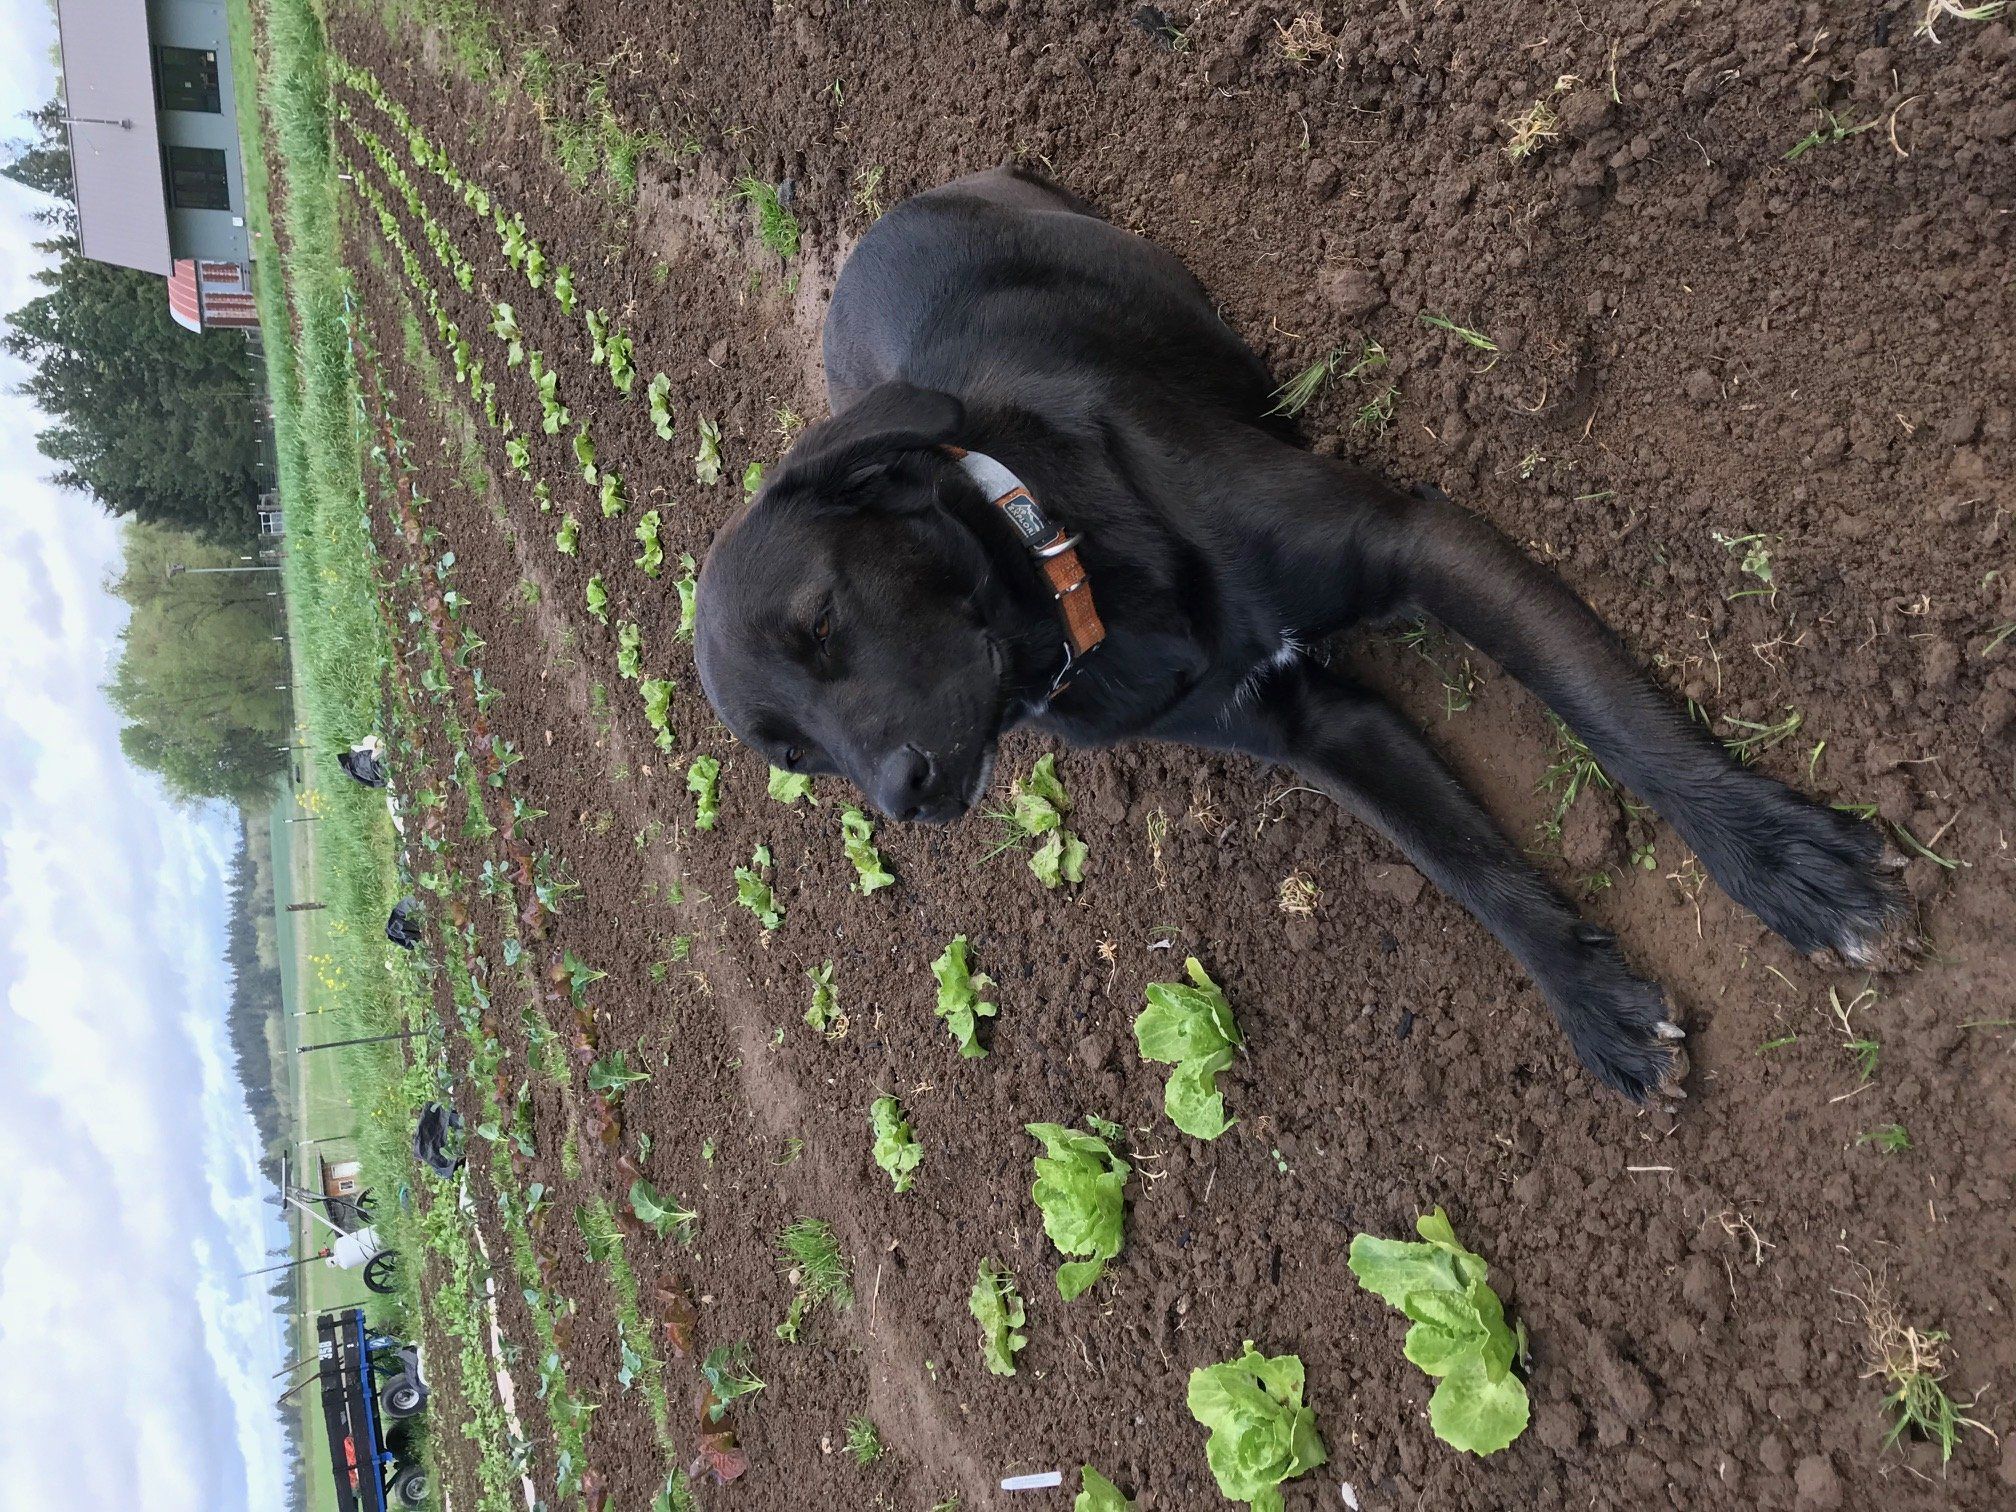 Previous Happening: Farm Happenings for May 2, 2020